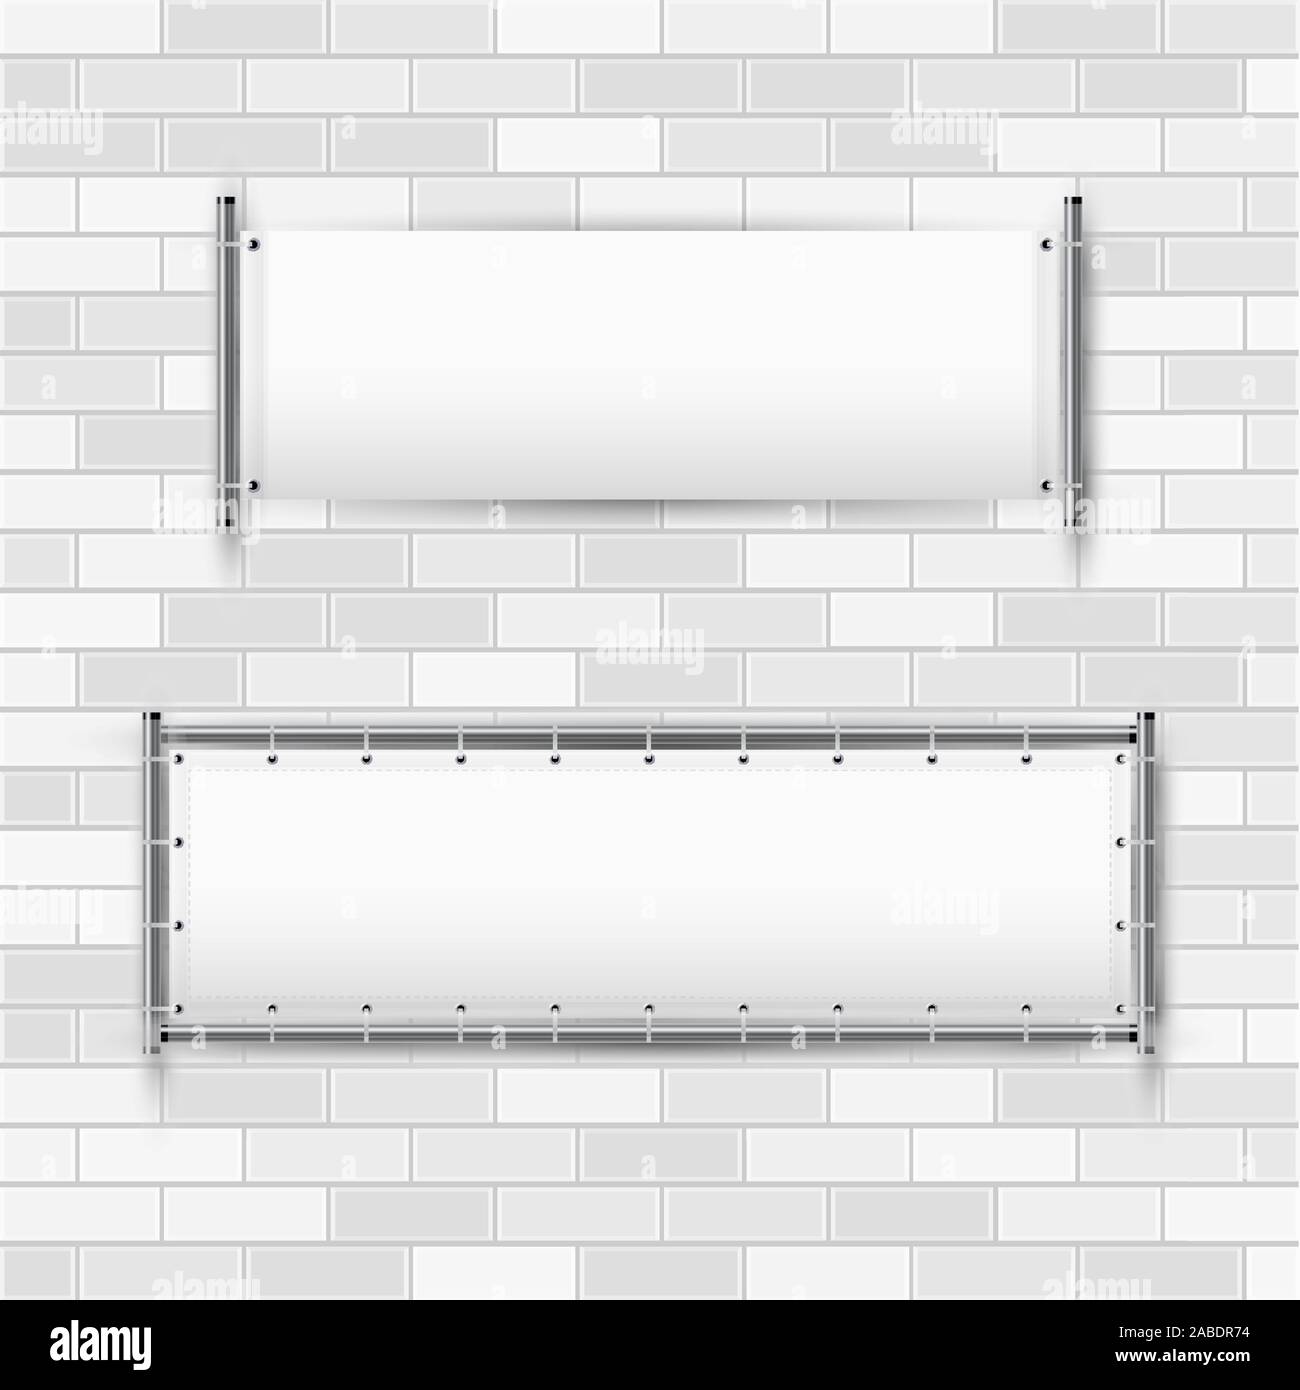 Empty white vinyl banners with grommets hanging on a rigid metal frame. Horizontal blank advertising banners on a white brick wall. Vector illustratio Stock Vector